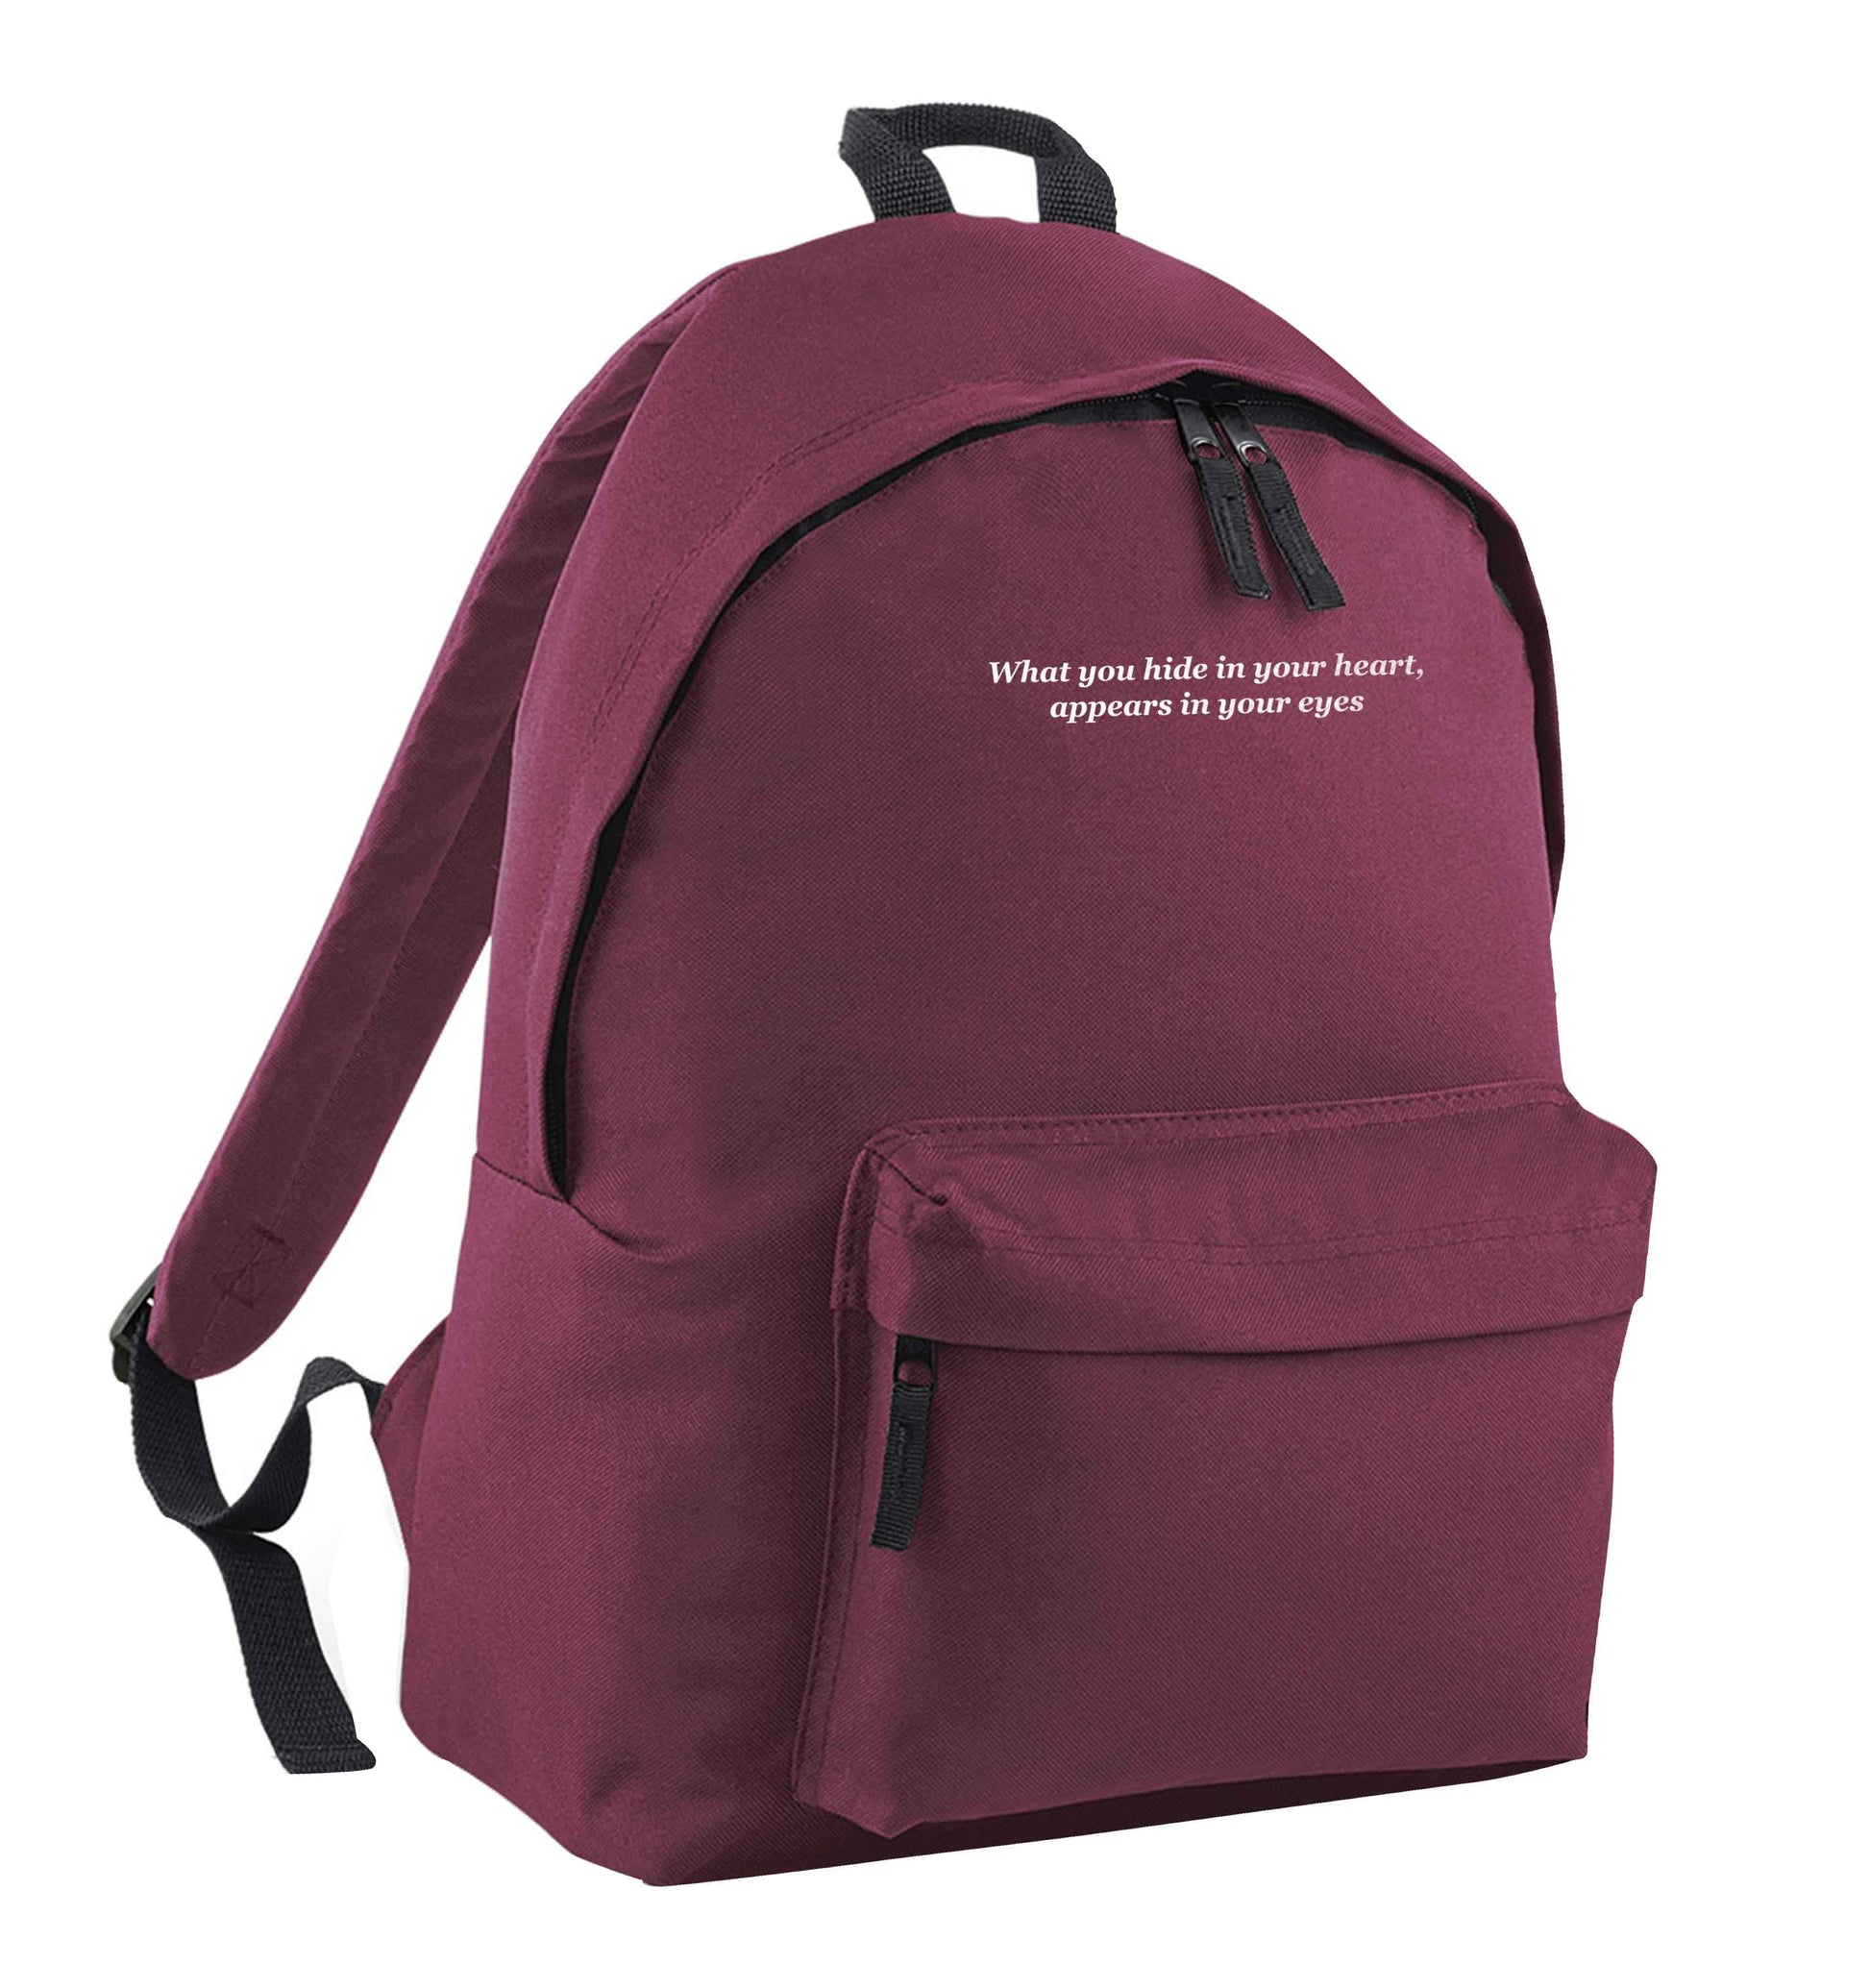 What you hide in your heart, appears in your eyes maroon adults backpack